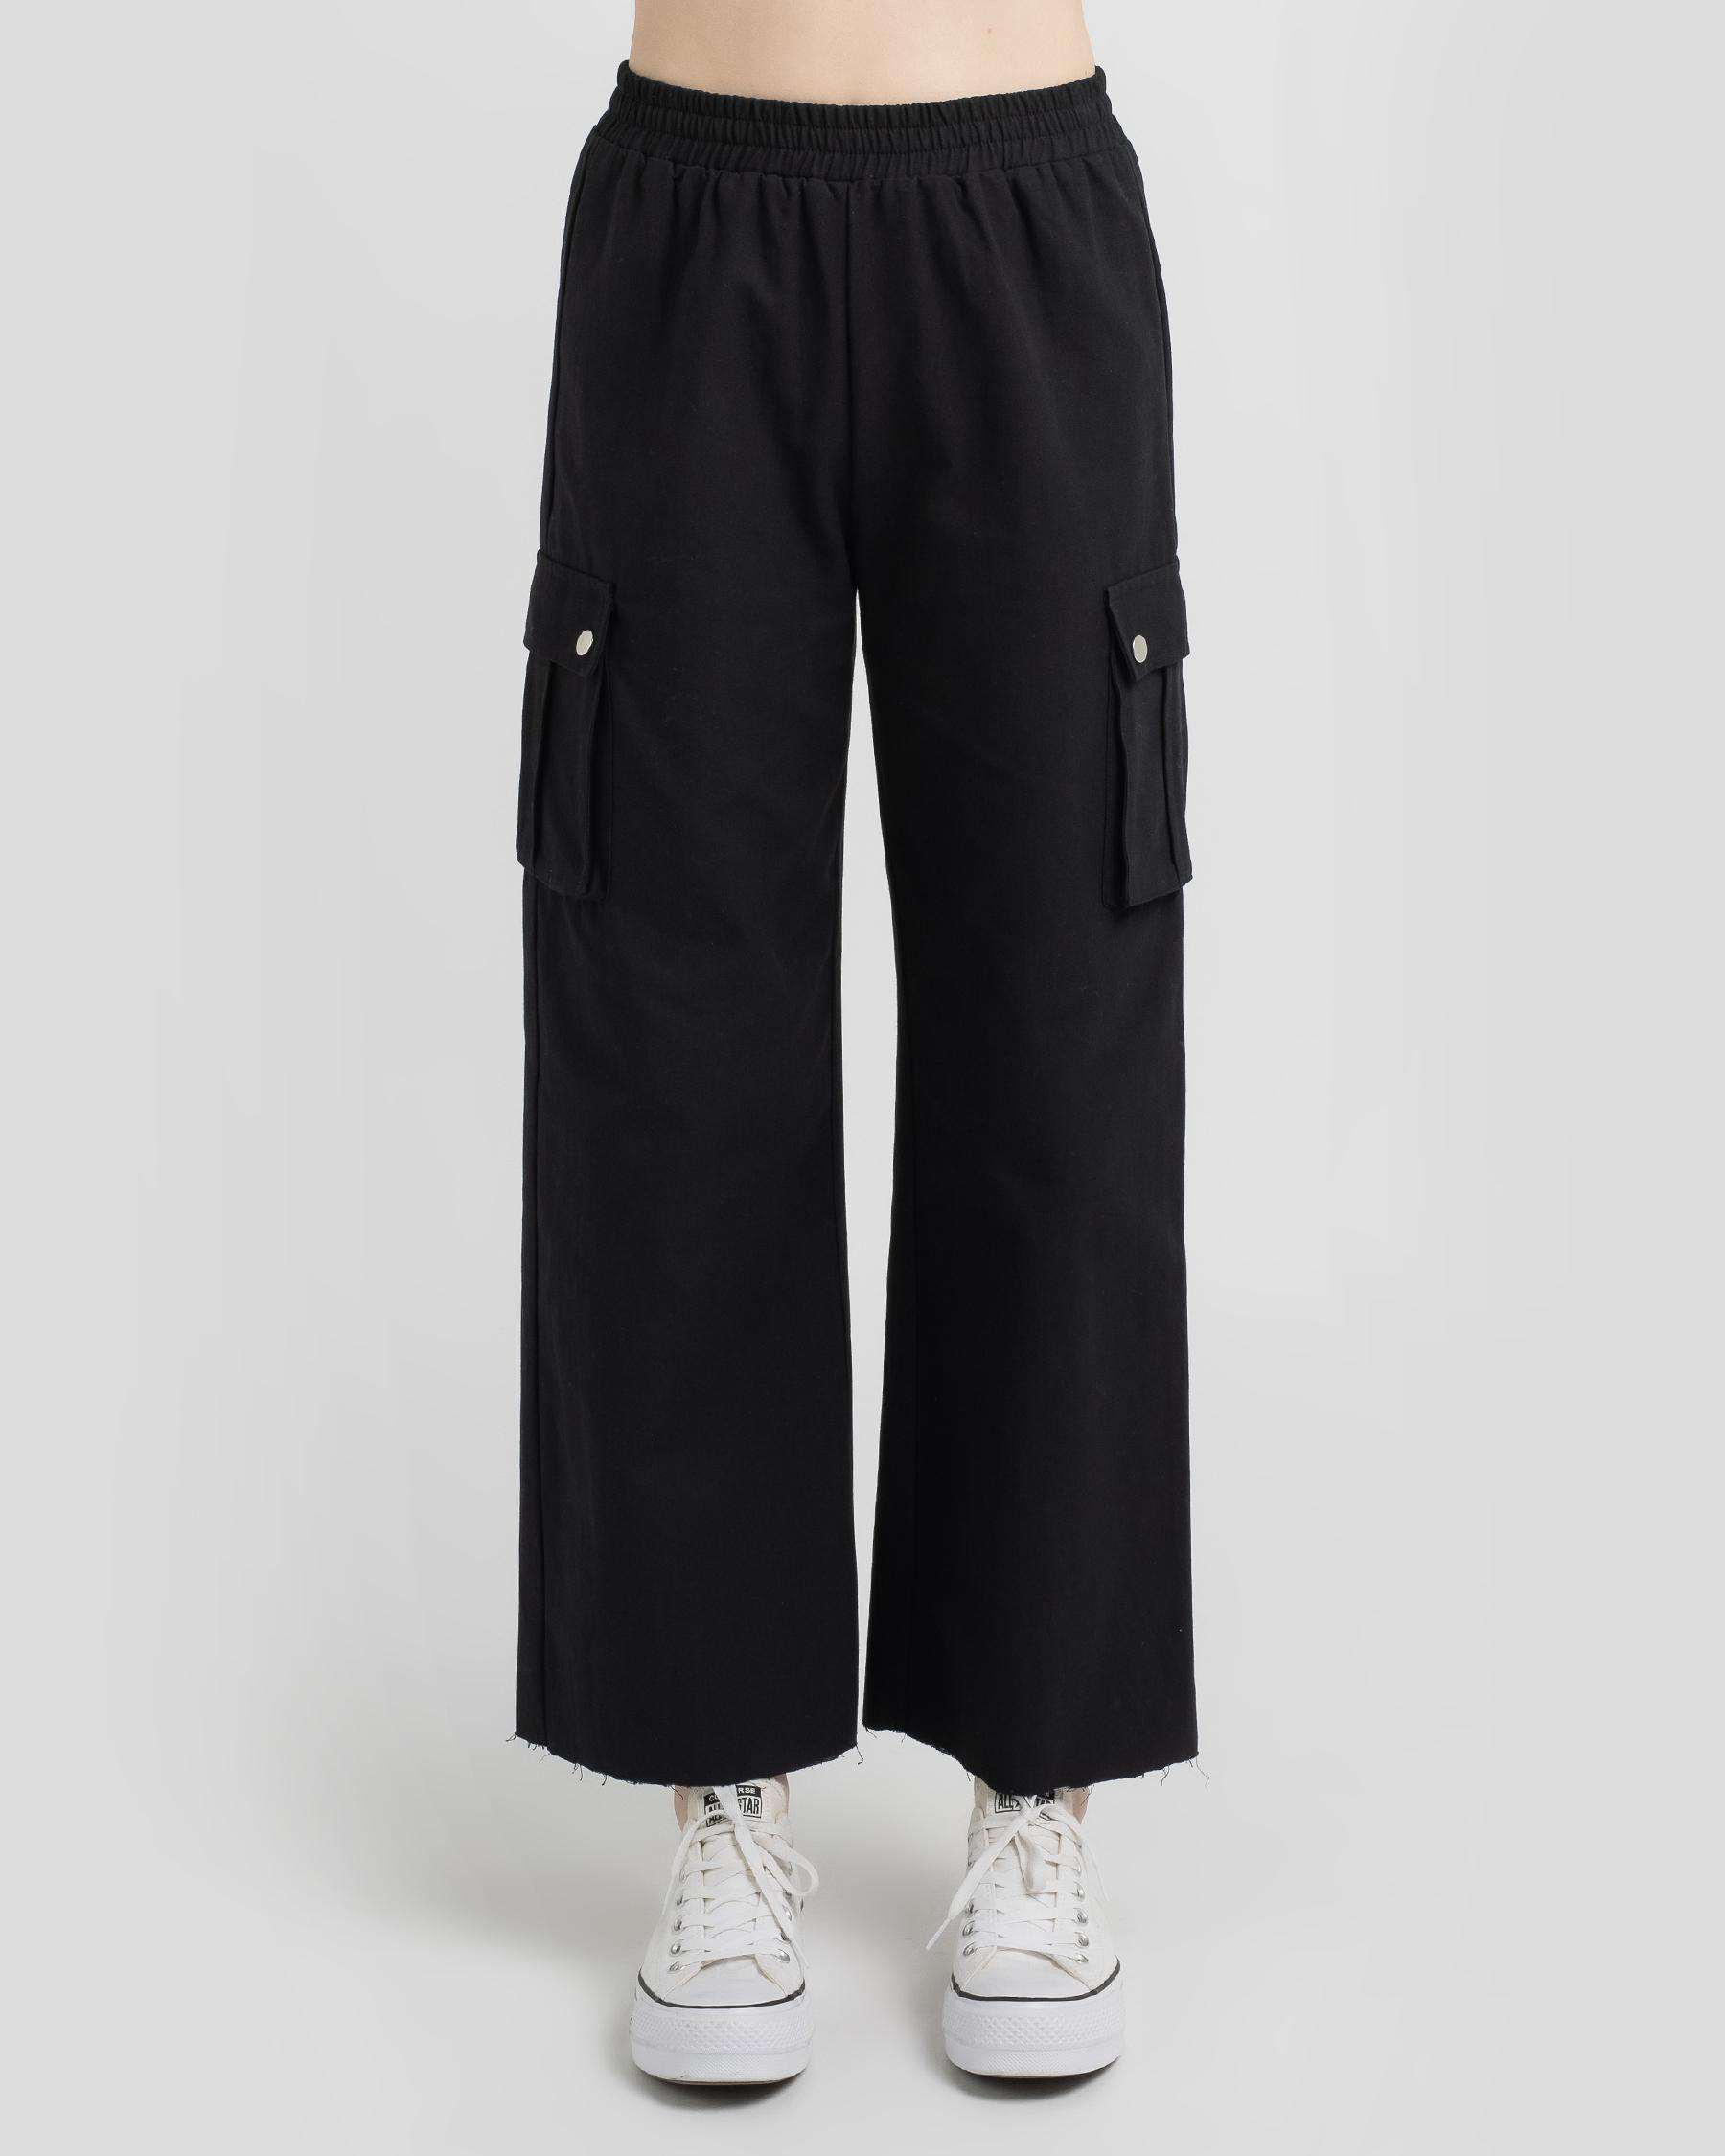 Shop Ava And Ever Girls' Misha Pants In Black - Fast Shipping & Easy ...